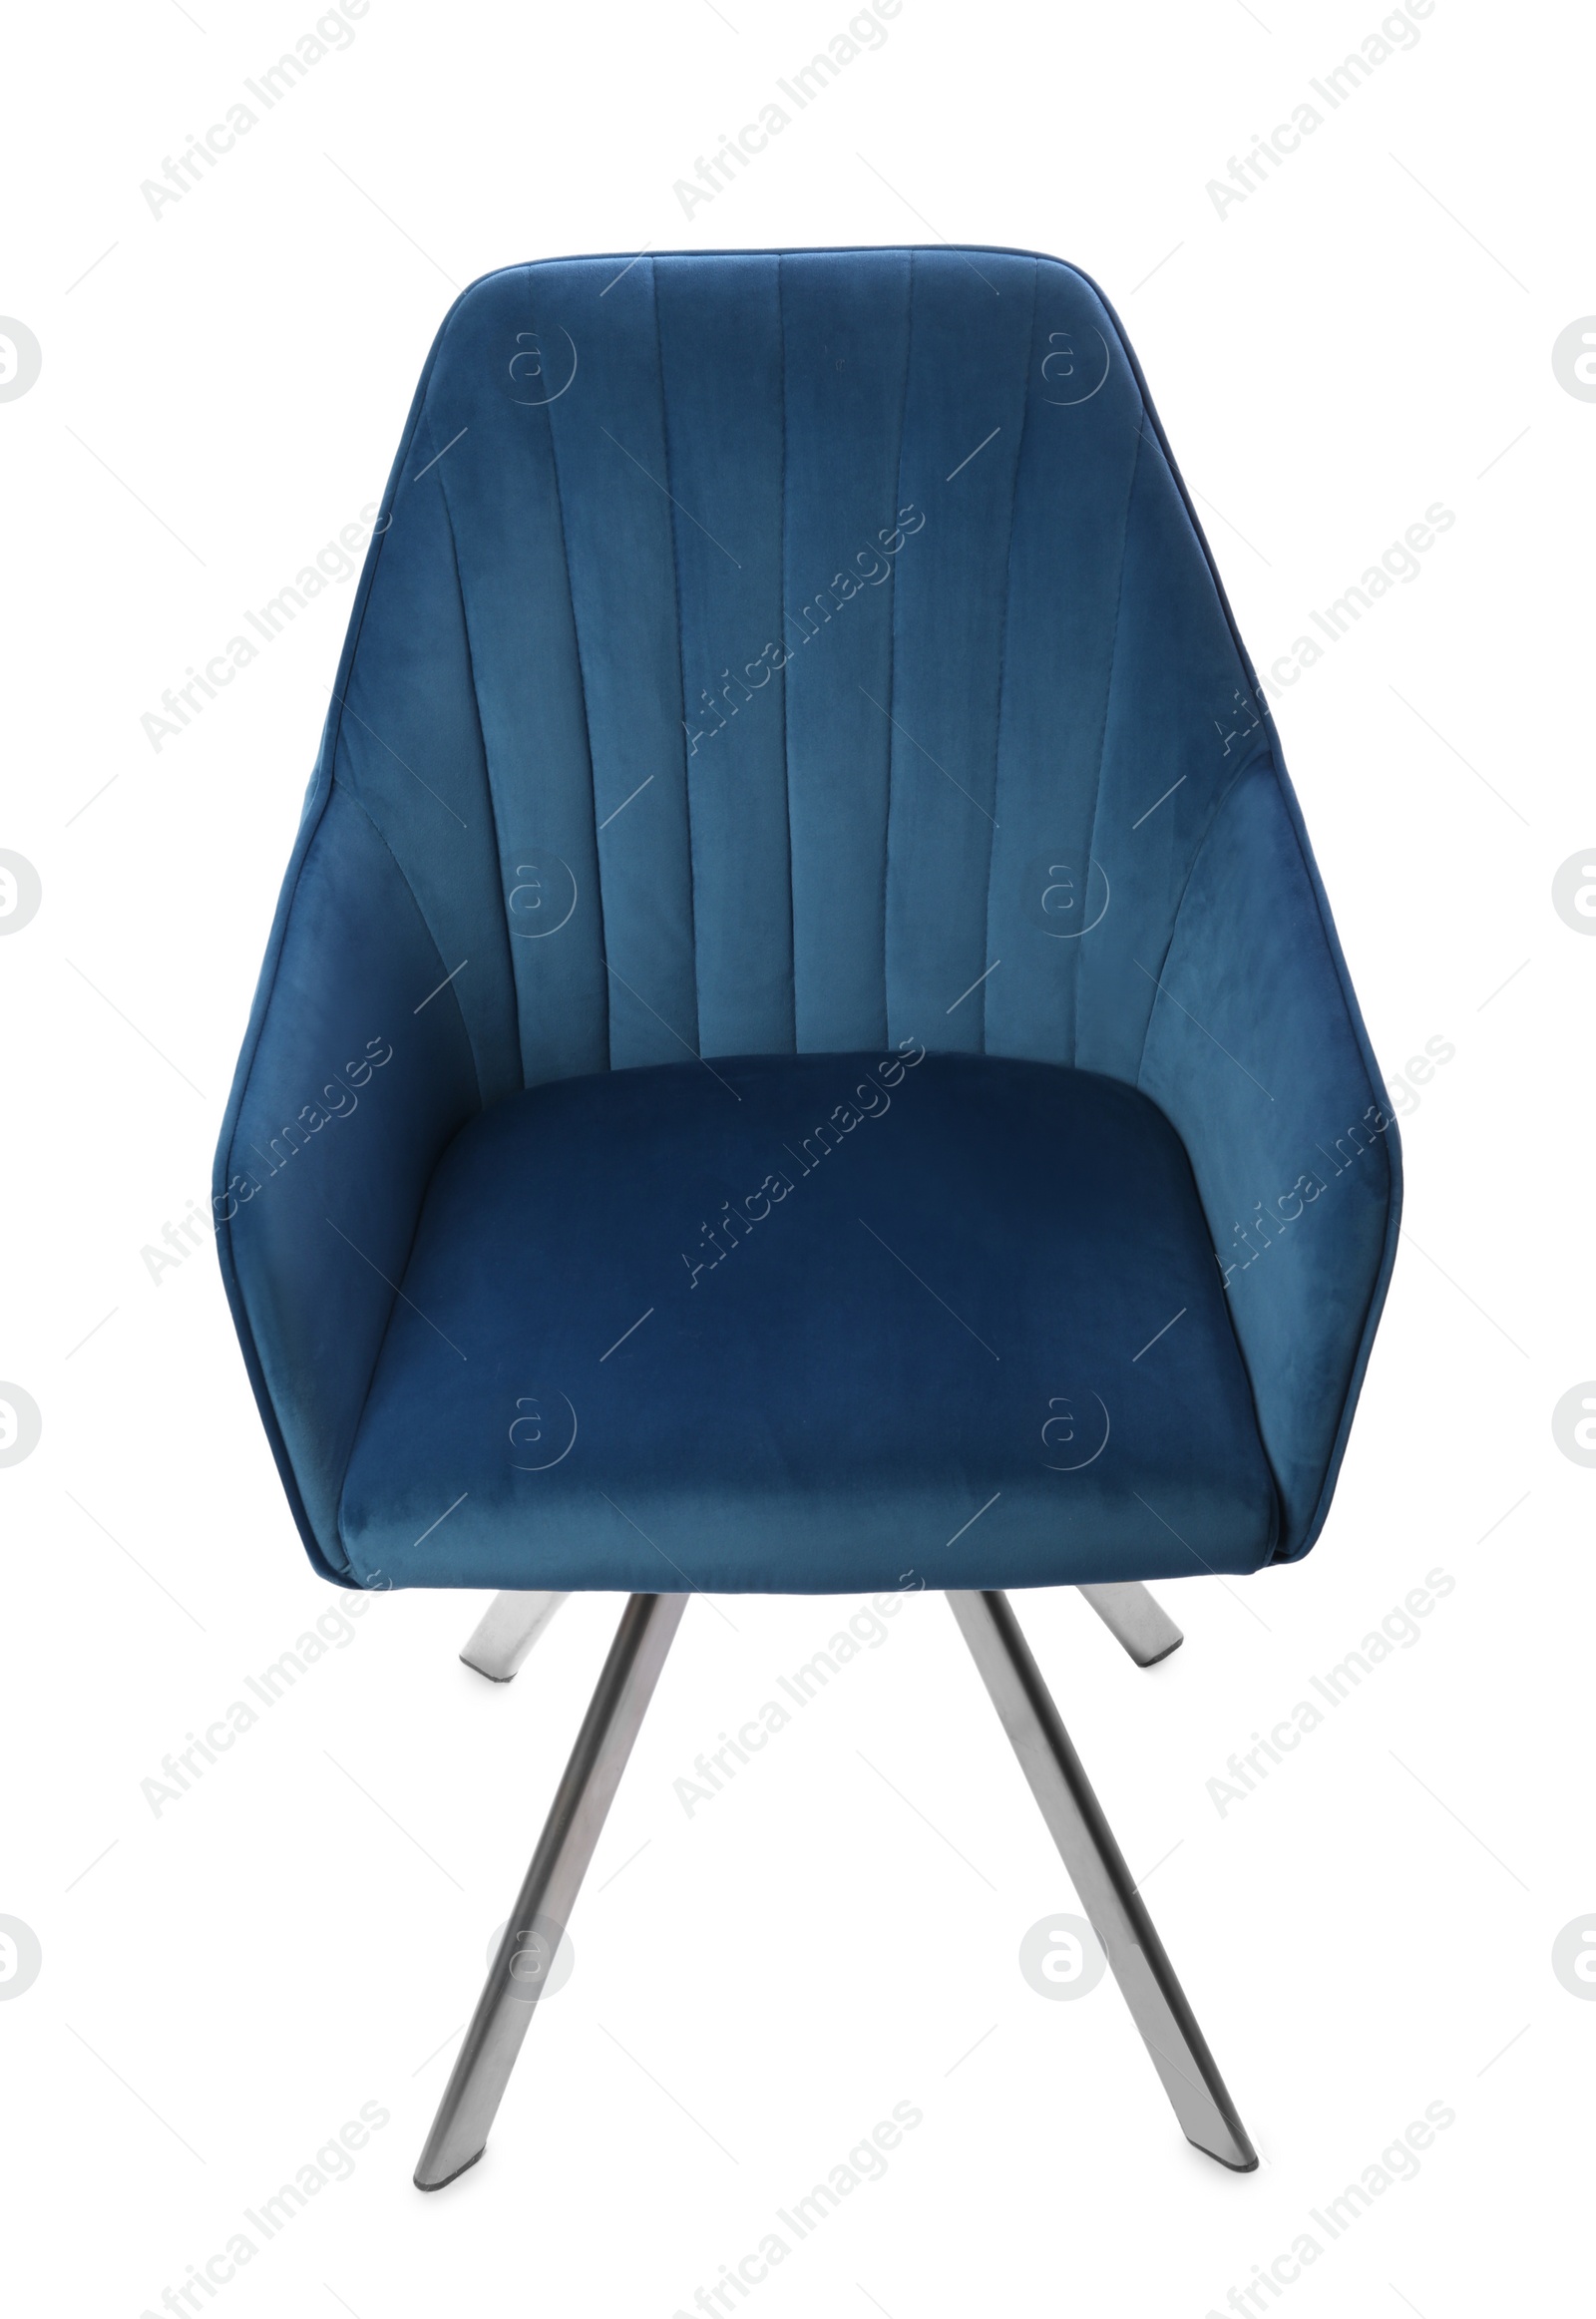 Photo of Stylish comfortable blue chair isolated on white